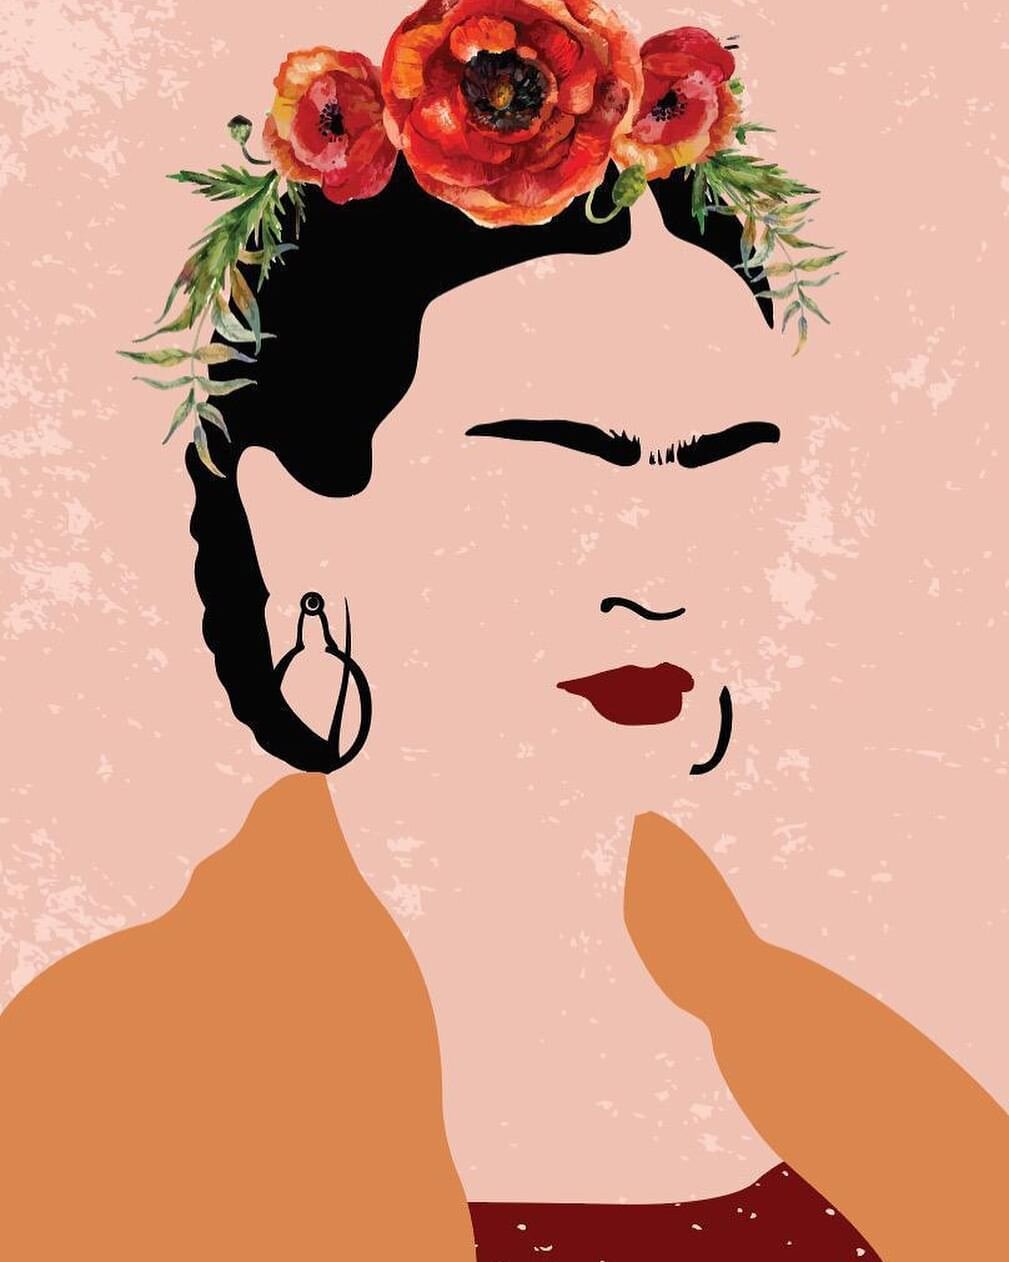 Love how this turned out. 💜 long live Frida!